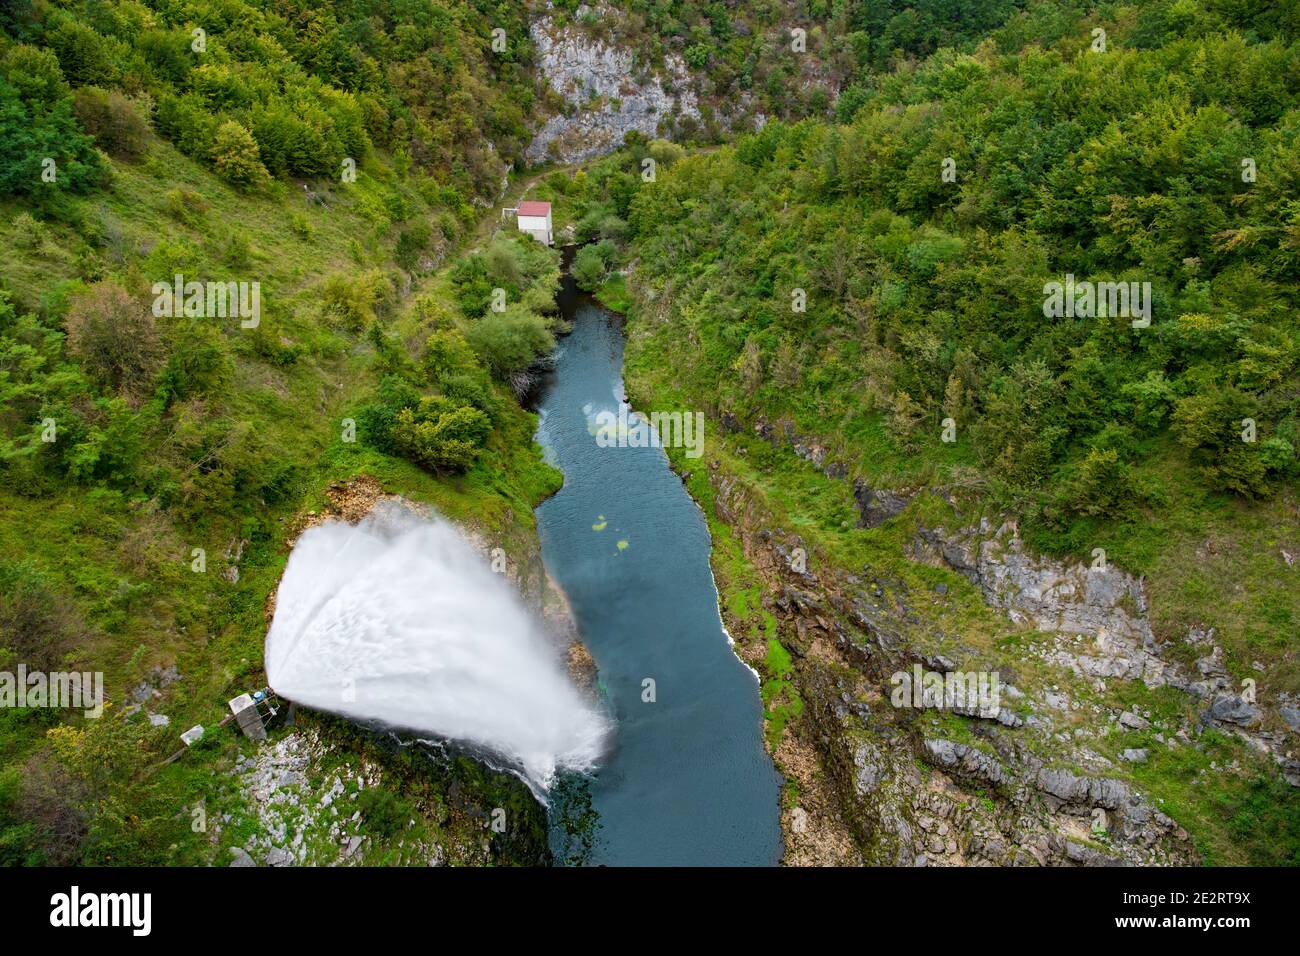 Discharge of water over the dam from Sjenica Lake Uvac into the Vapa River Stock Photo